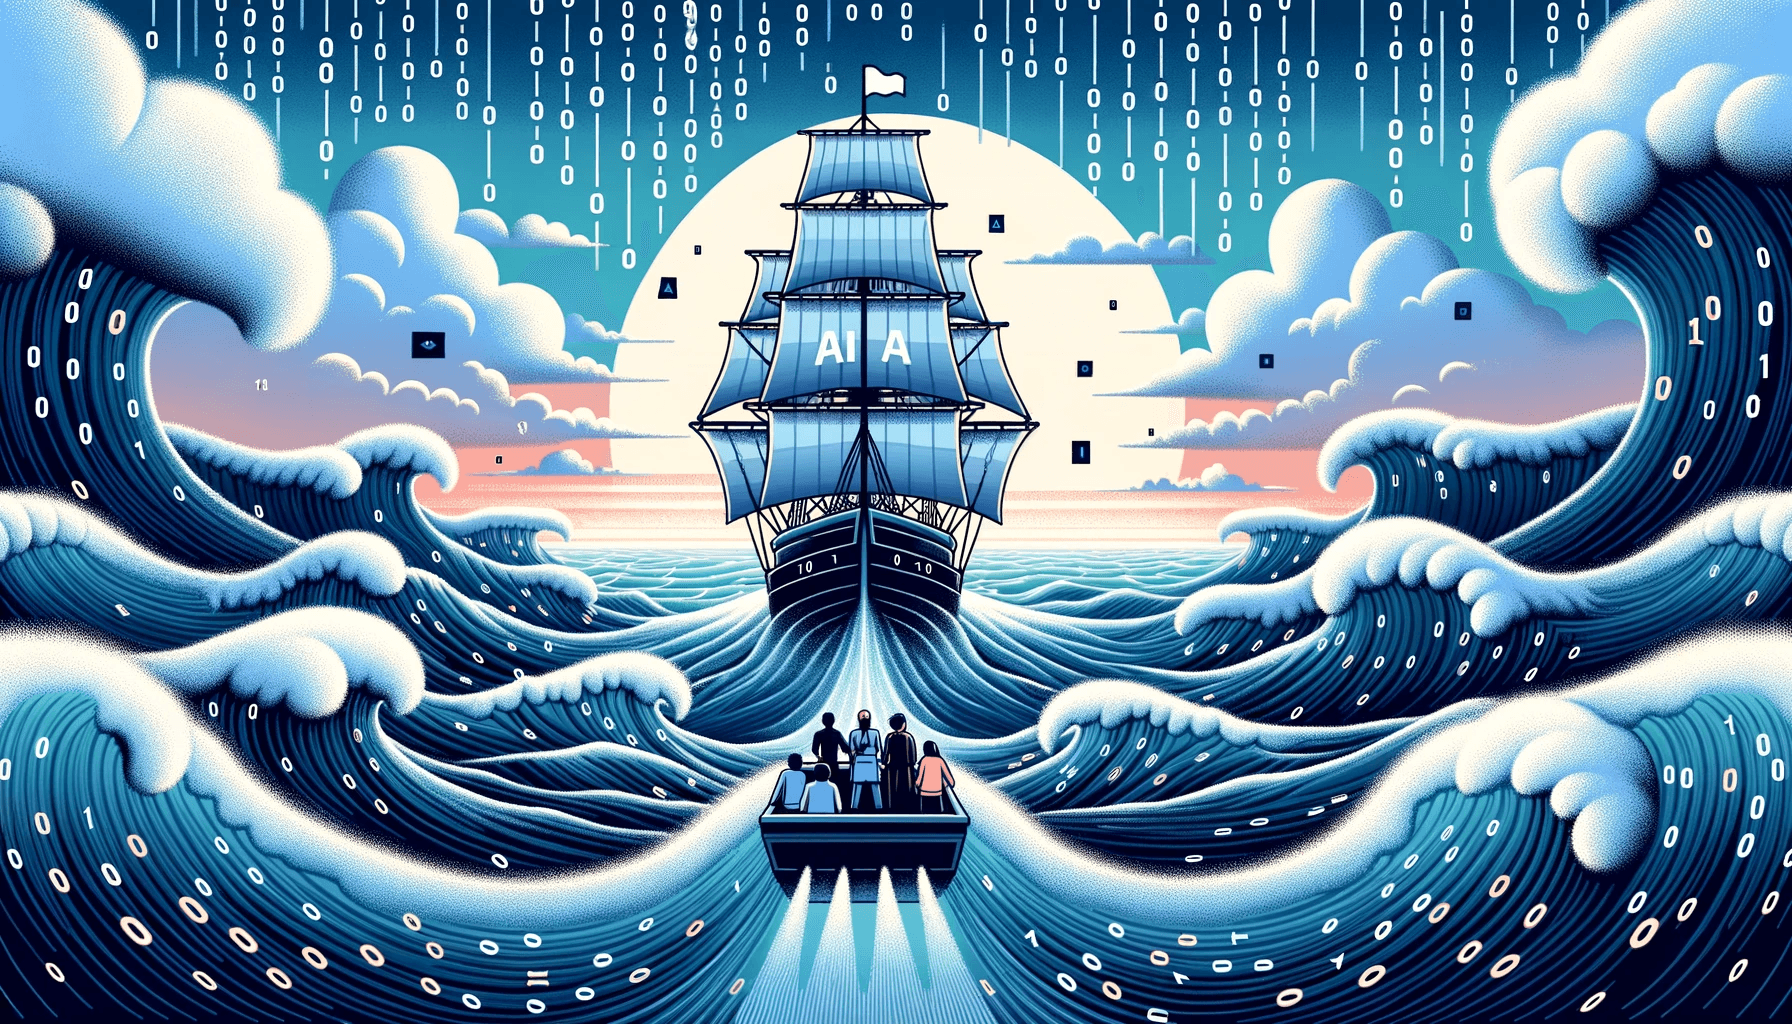 Illustration in a 16:9 aspect ratio that portrays a tumultuous sea with waves made of binary codes, symbolizing the chaos of AI risks. Amidst the stormy waters, a ship navigates, its sails bearing symbols of AI and algorithms. The horizon shows a calm sea